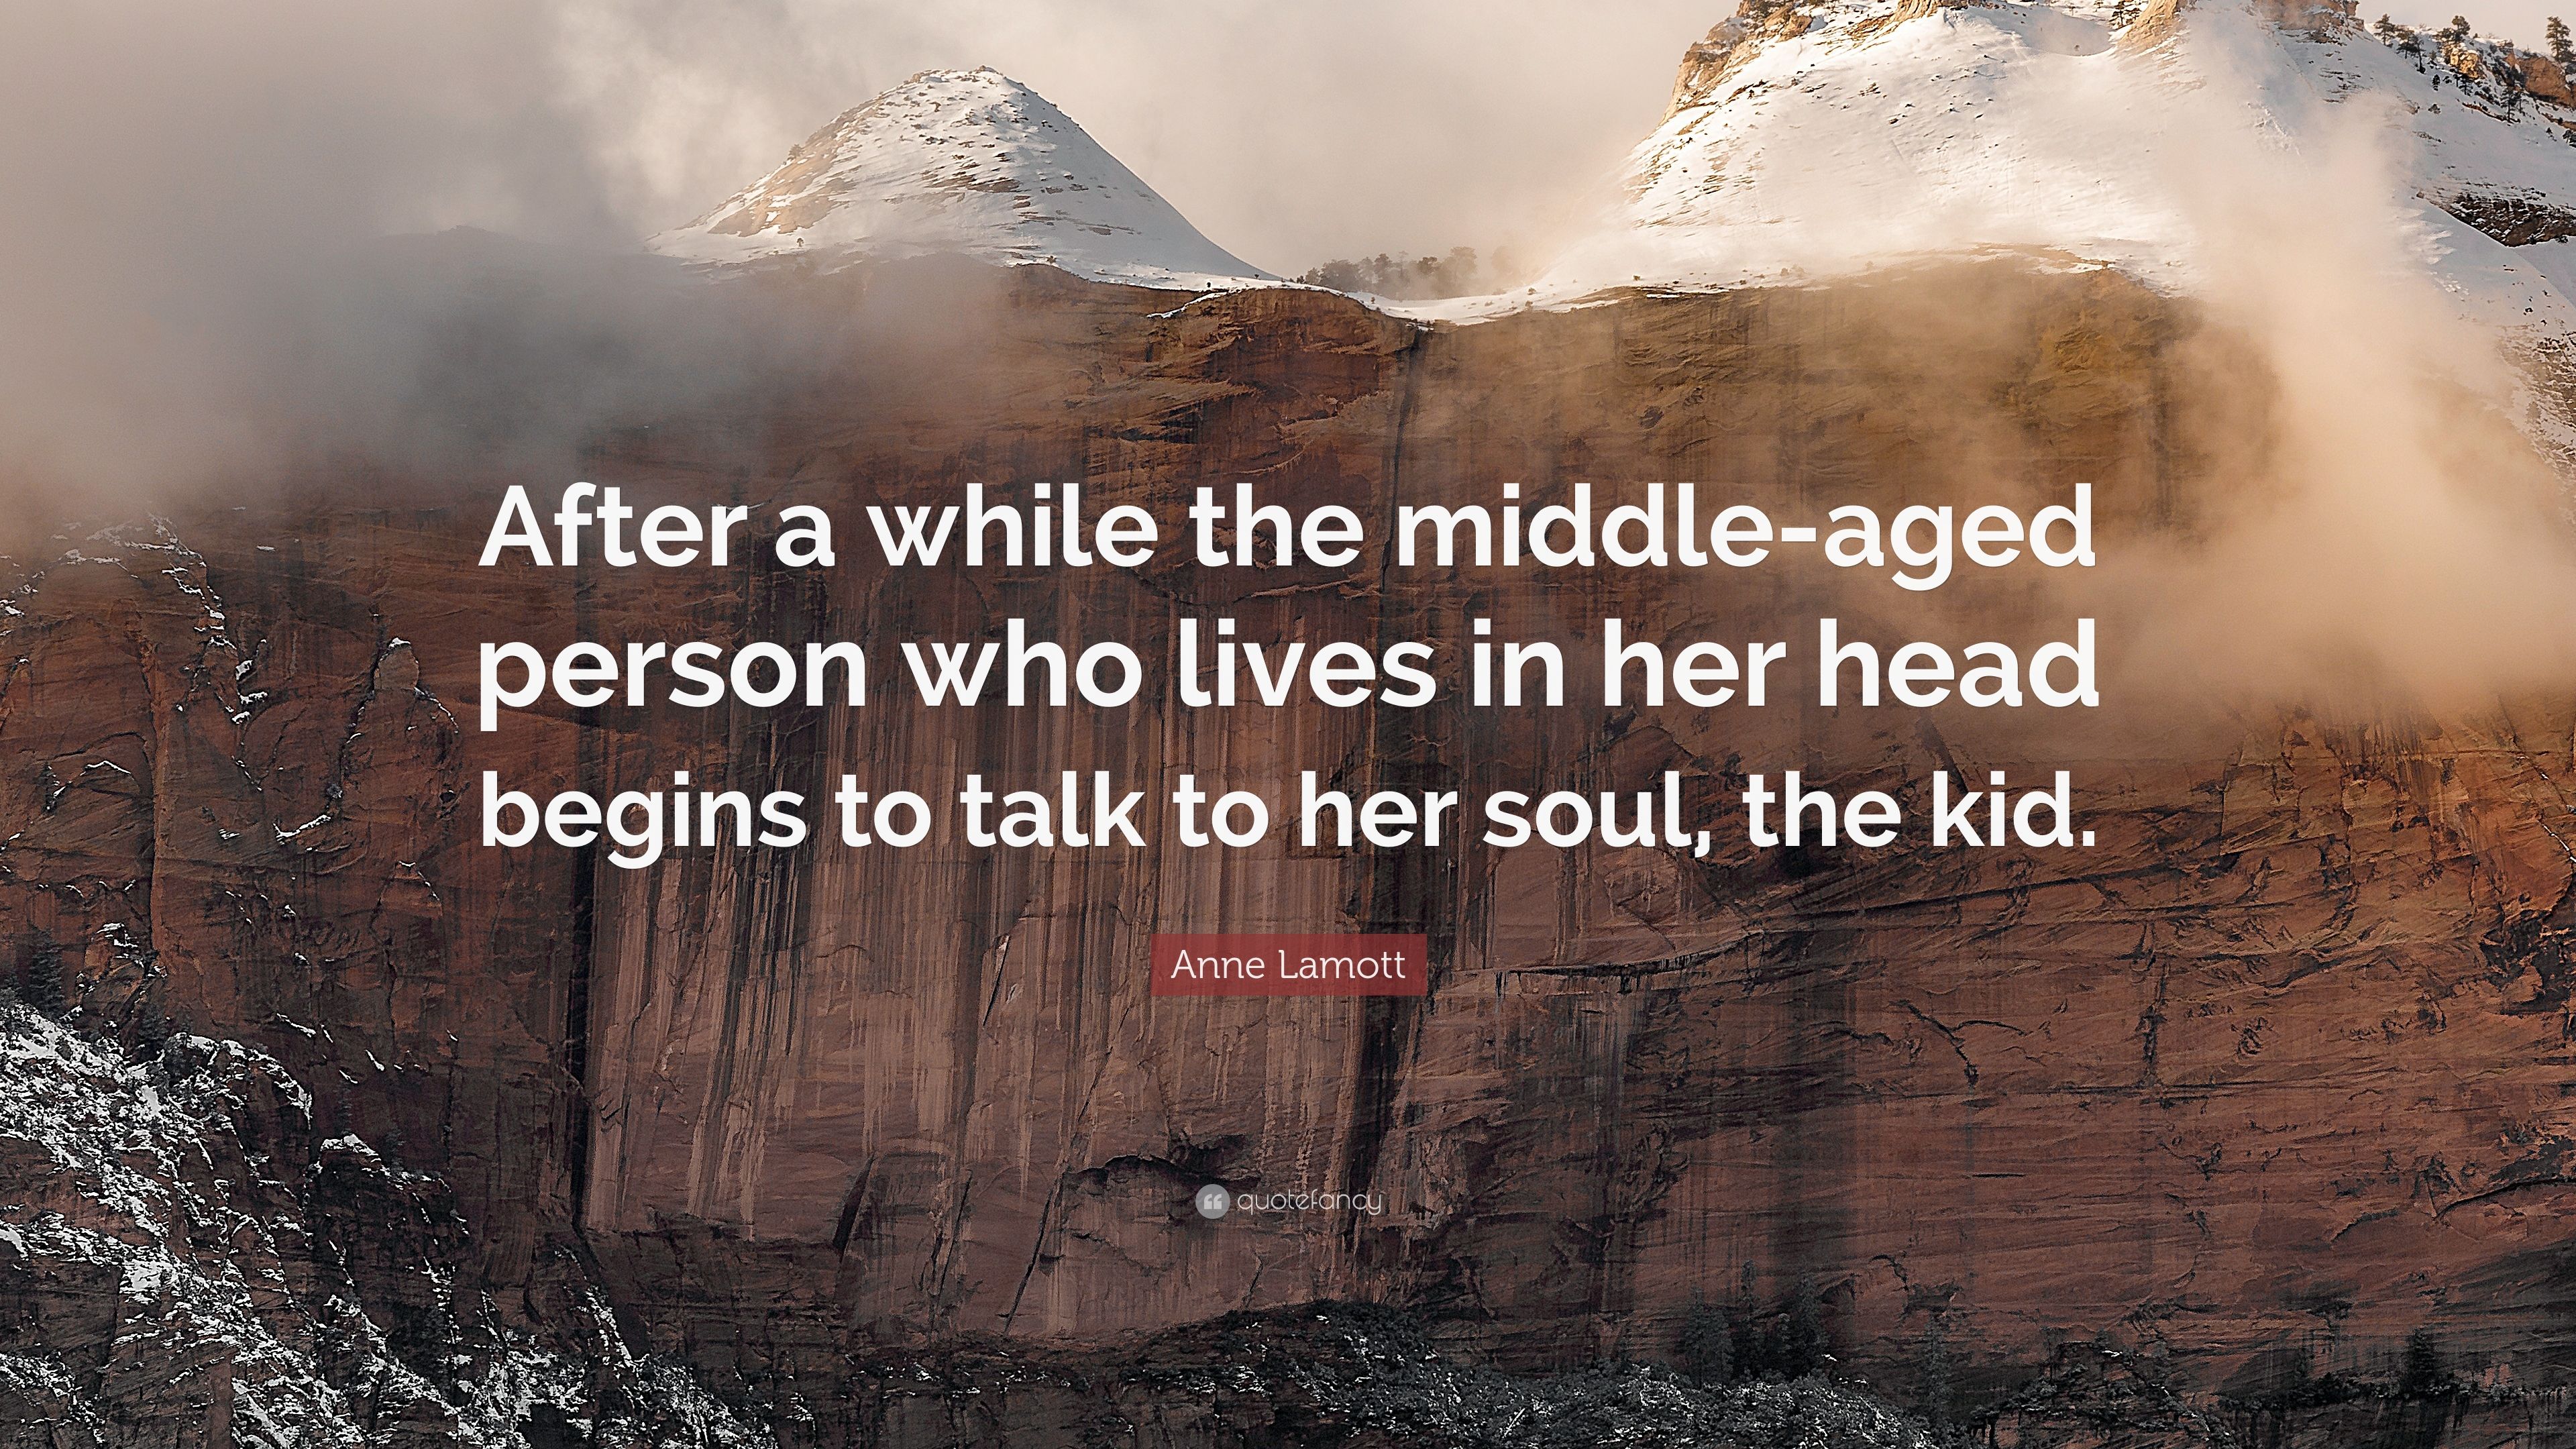 Anne Lamott Quote: “After a while the middle-aged person who lives ...